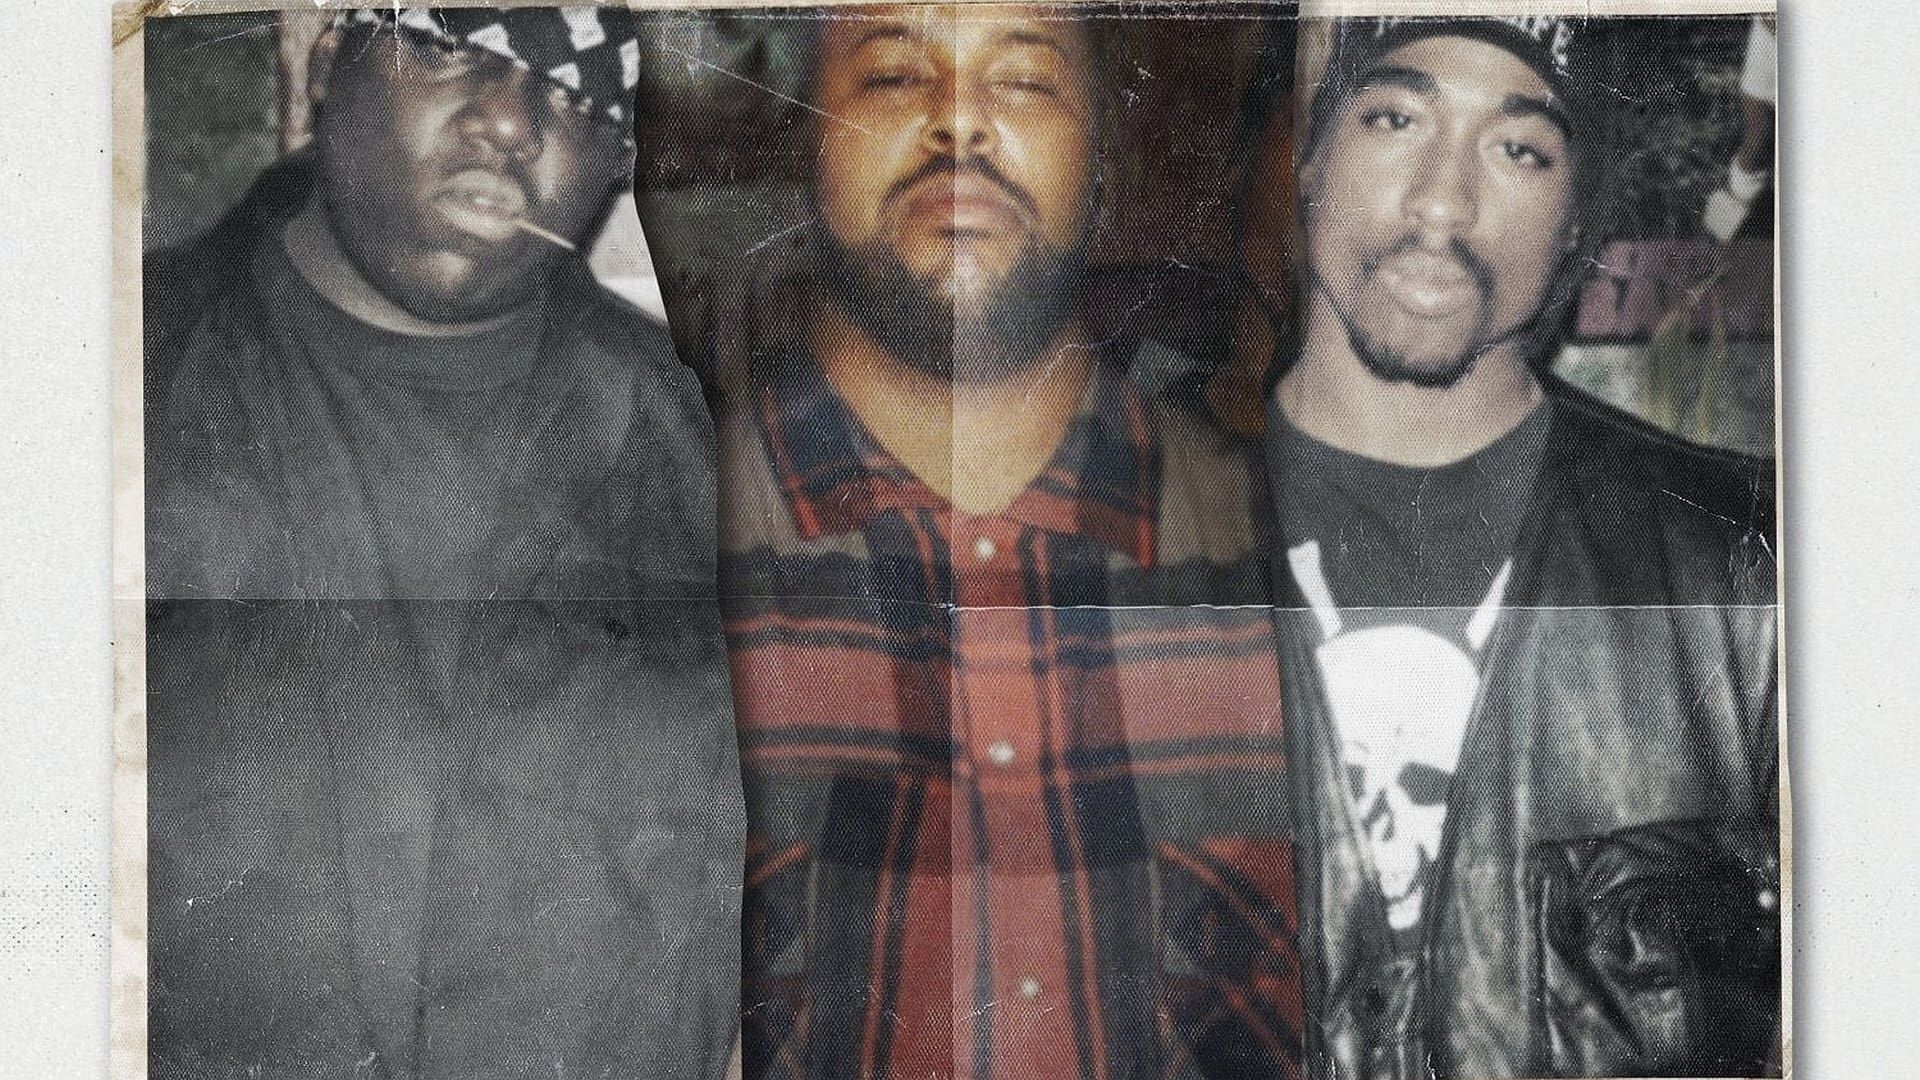 Last Man Standing: Suge Knight and the Murders of Biggie & Tupac background